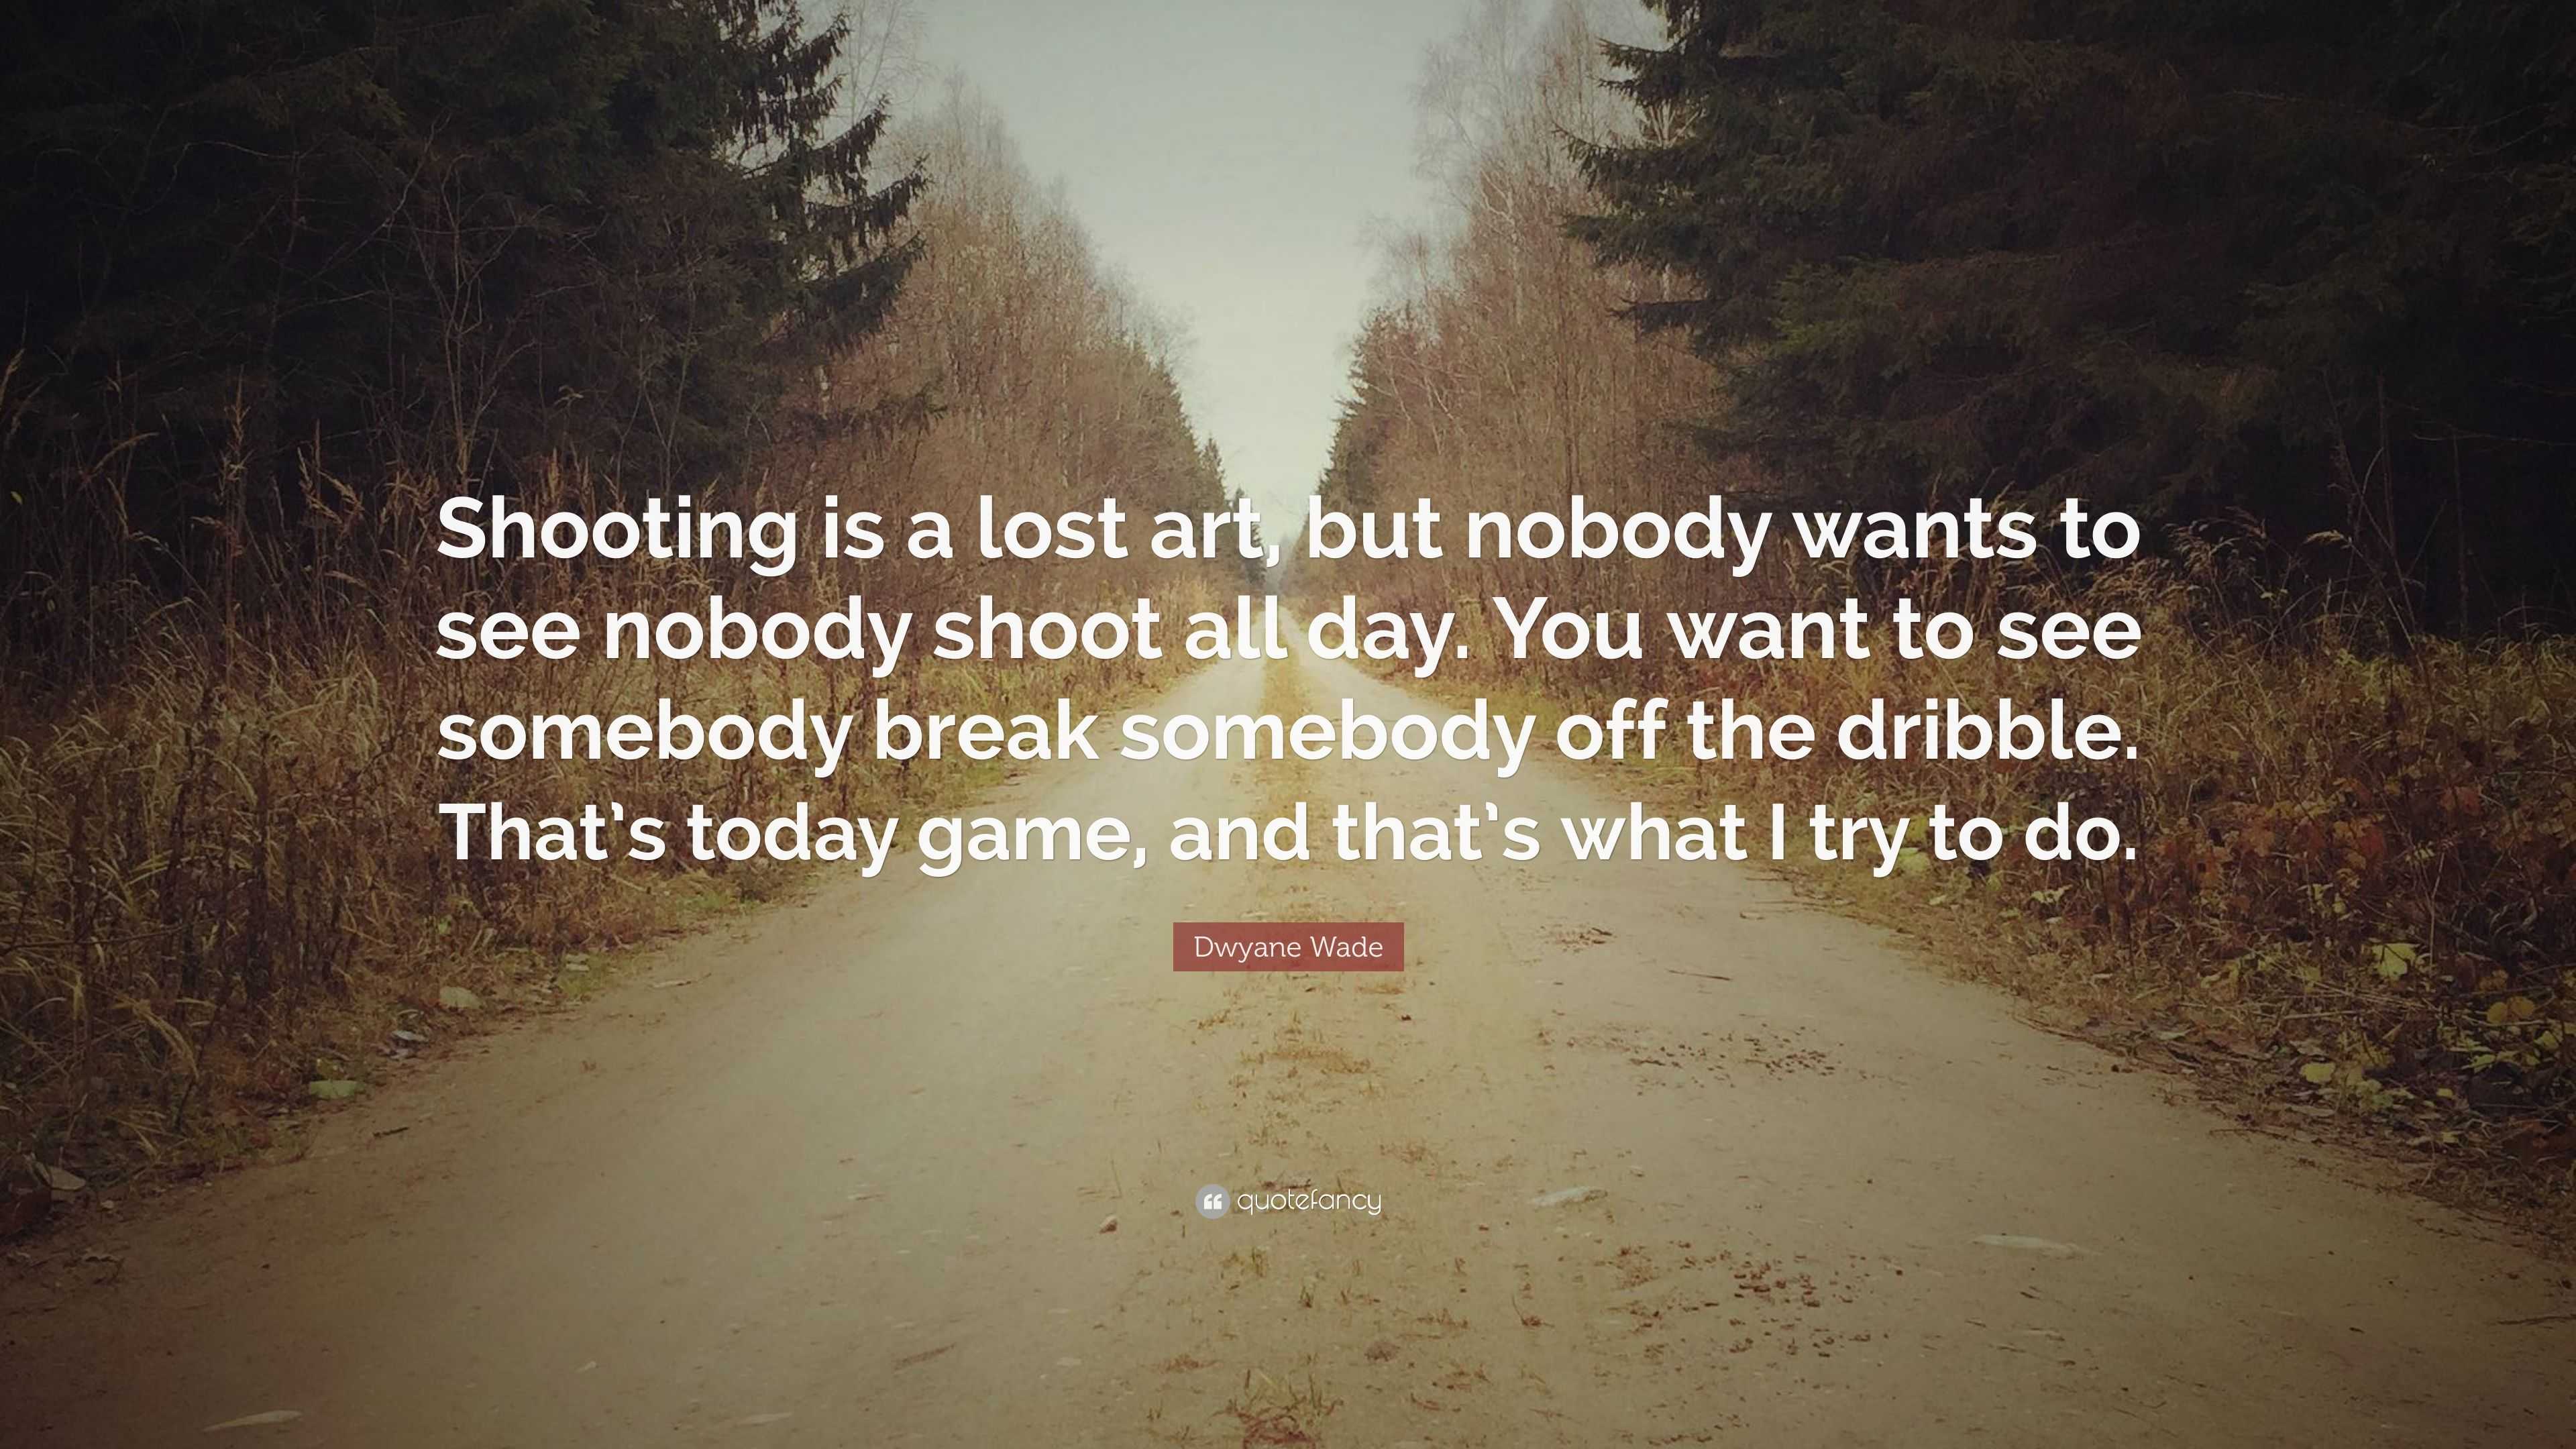 Dwyane Wade Quote: “Shooting is a lost art, but nobody wants to see ...